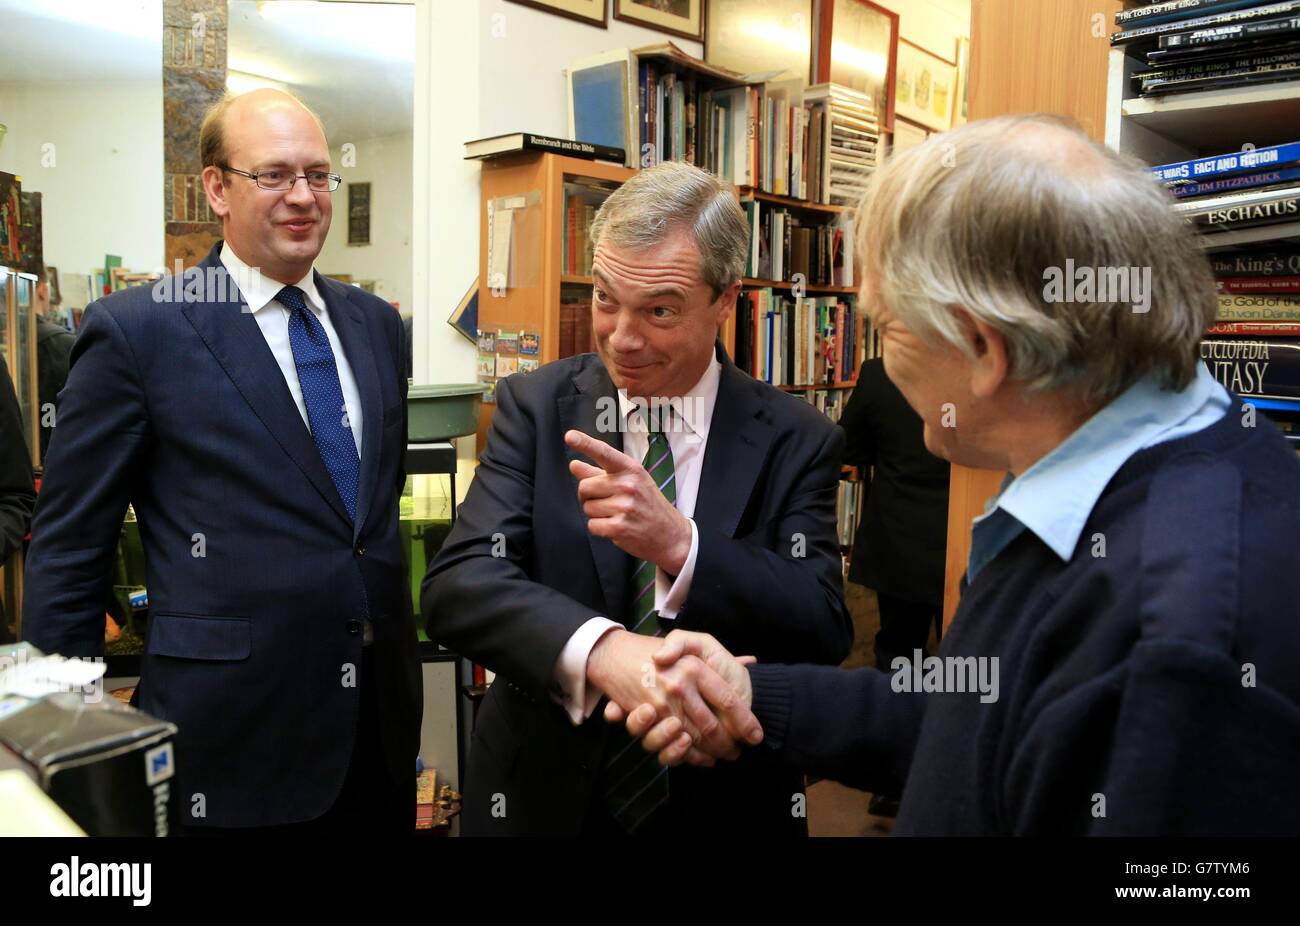 Ukip Leader Nigel Farage (centre) accompanied by Mark Reckless (left), Ukip candidate for Rochester and Strood, shakes the hand of Bob Peters from City Books shop in Rochester High Street, Kent, during a general election campaign walk about. Stock Photo